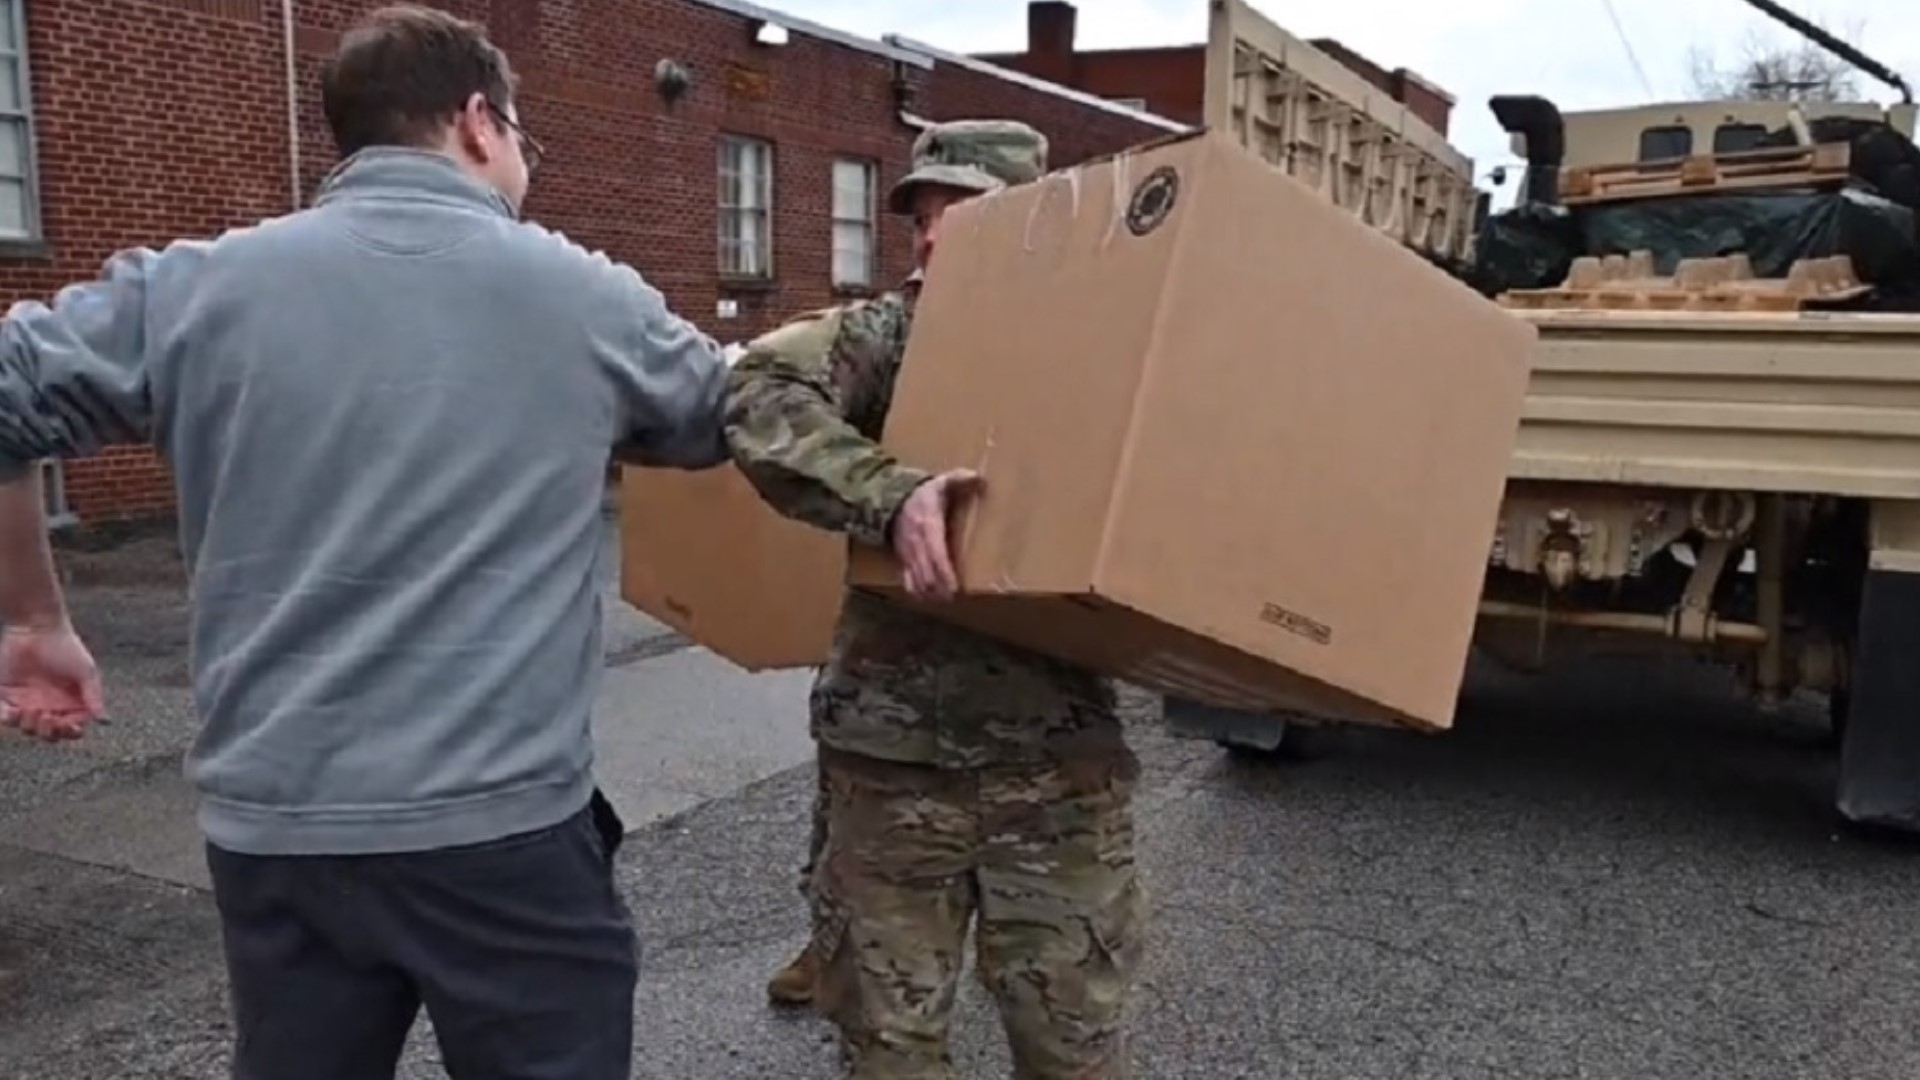 Members of the West Virginia National Guard deliver medical supplies to Highland Hospital and the Kanawha County Health Department.